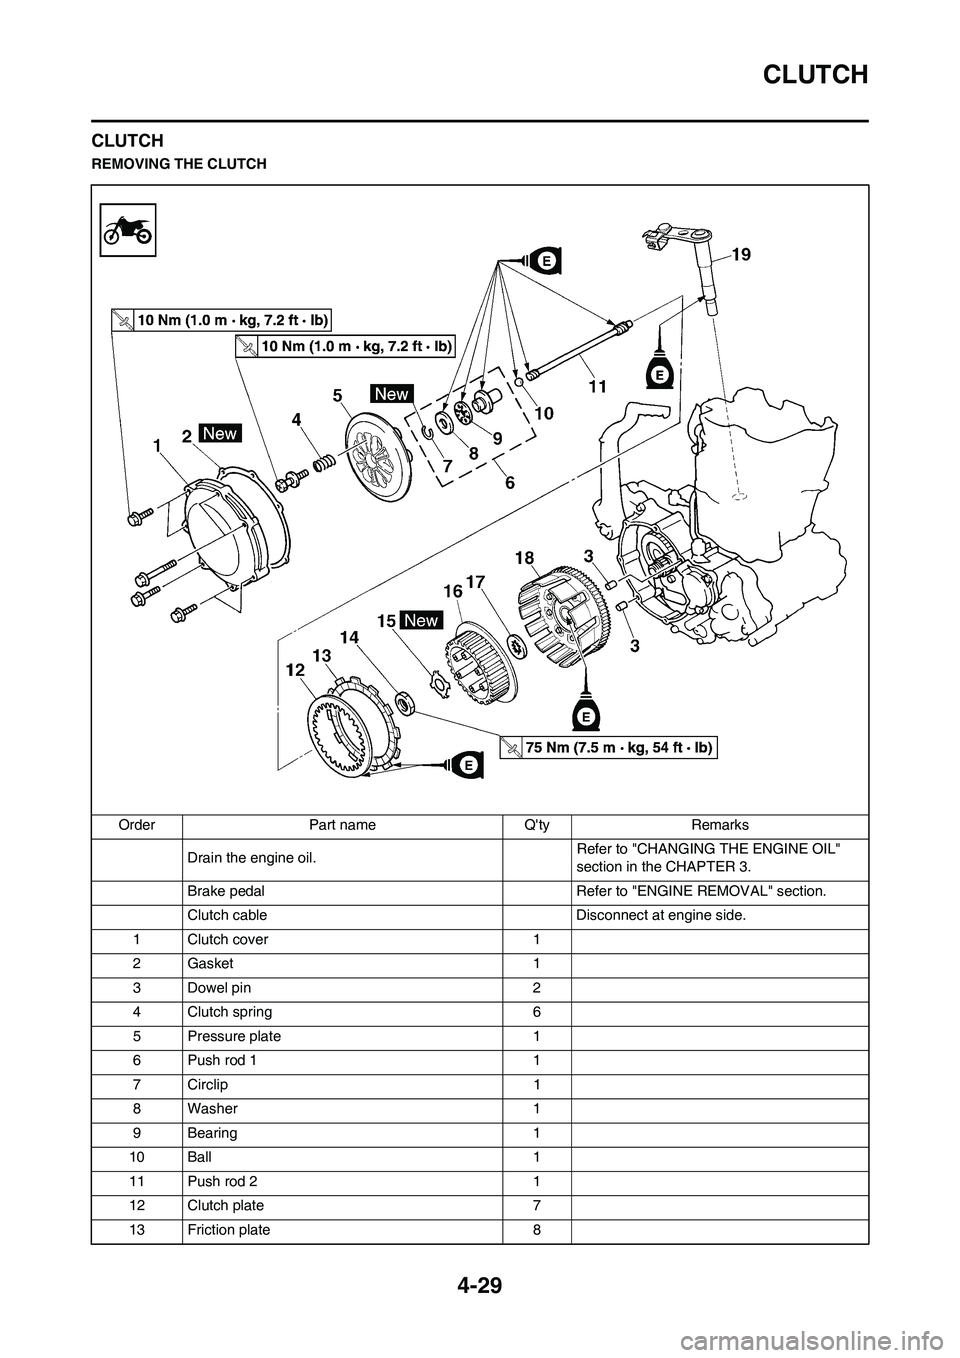 YAMAHA YZ450F 2009  Owners Manual 4-29
CLUTCH
CLUTCH
REMOVING THE CLUTCH
Order Part name Qty Remarks
Drain the engine oil. Refer to "CHANGING THE ENGINE OIL" 
section in the CHAPTER 3.
Brake pedal  Refer to "ENGINE REMOVAL" section.
